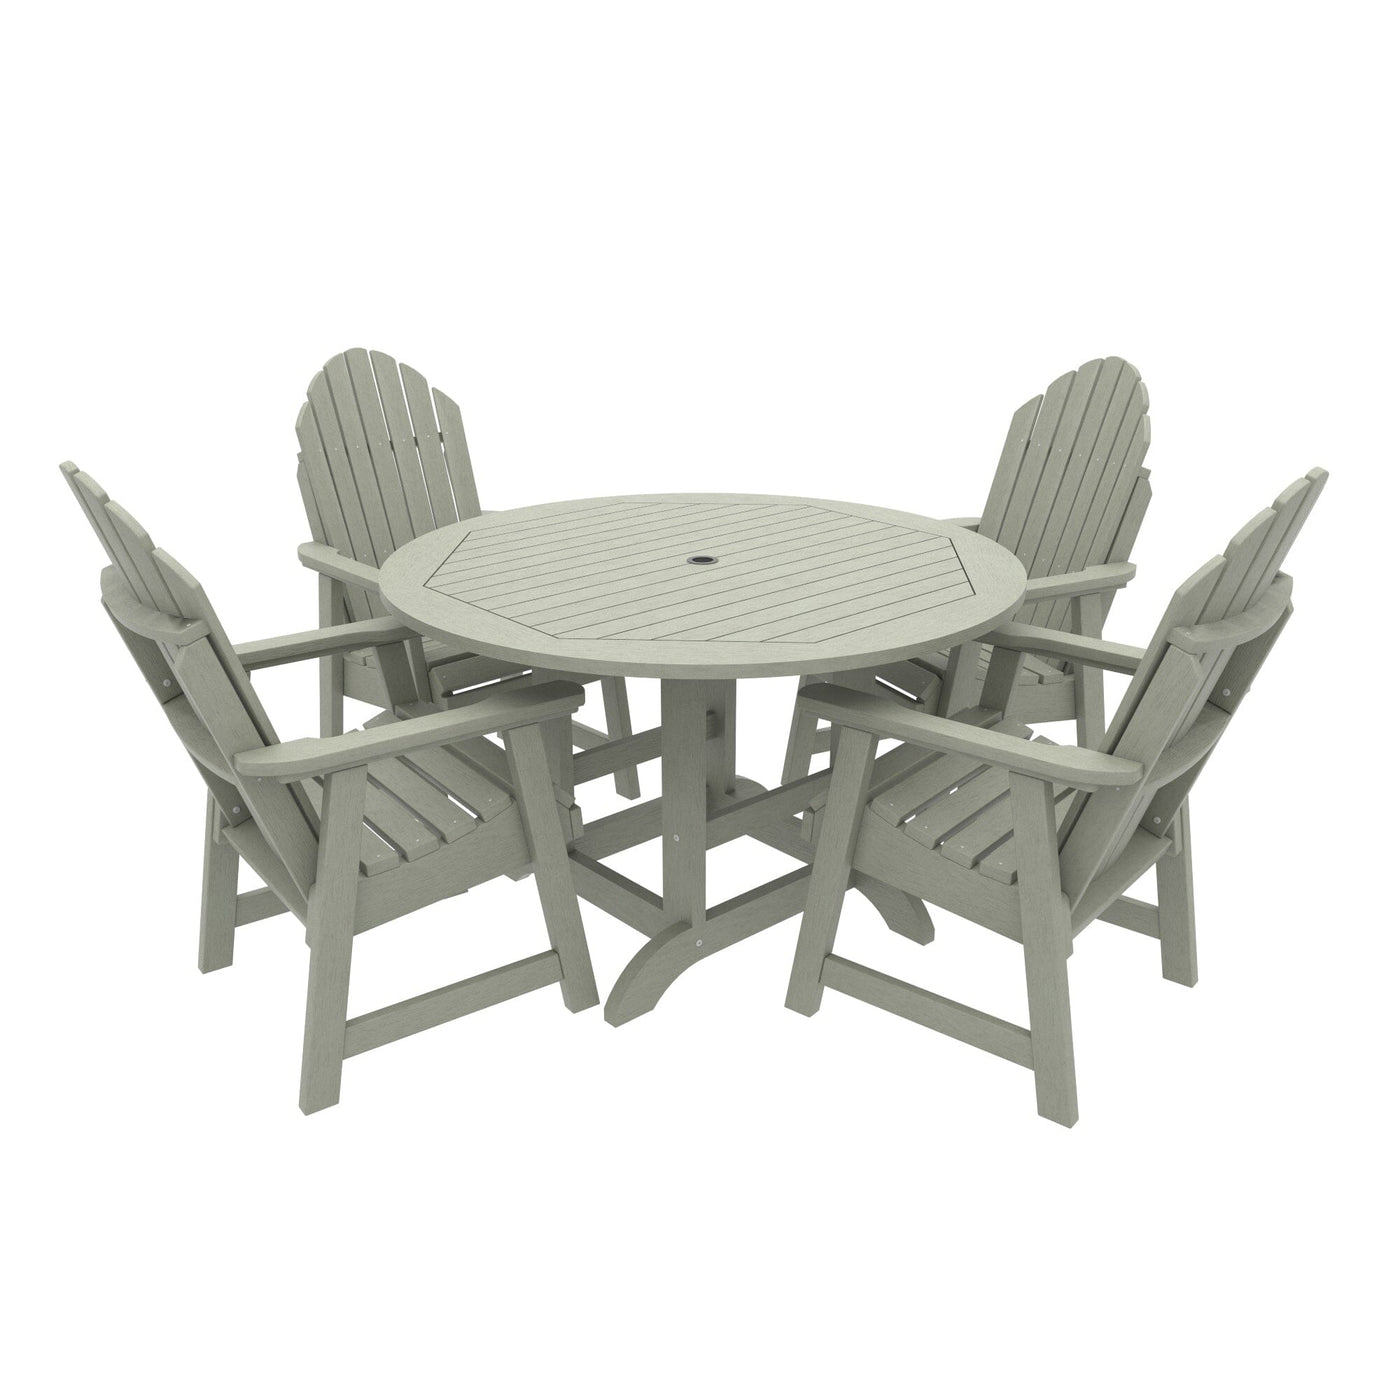 Commercial Grade 5 Pc Muskoka Adirondack Dining Set with 48” Table Kitted Sets Sequoia Professional Eucalyptus 